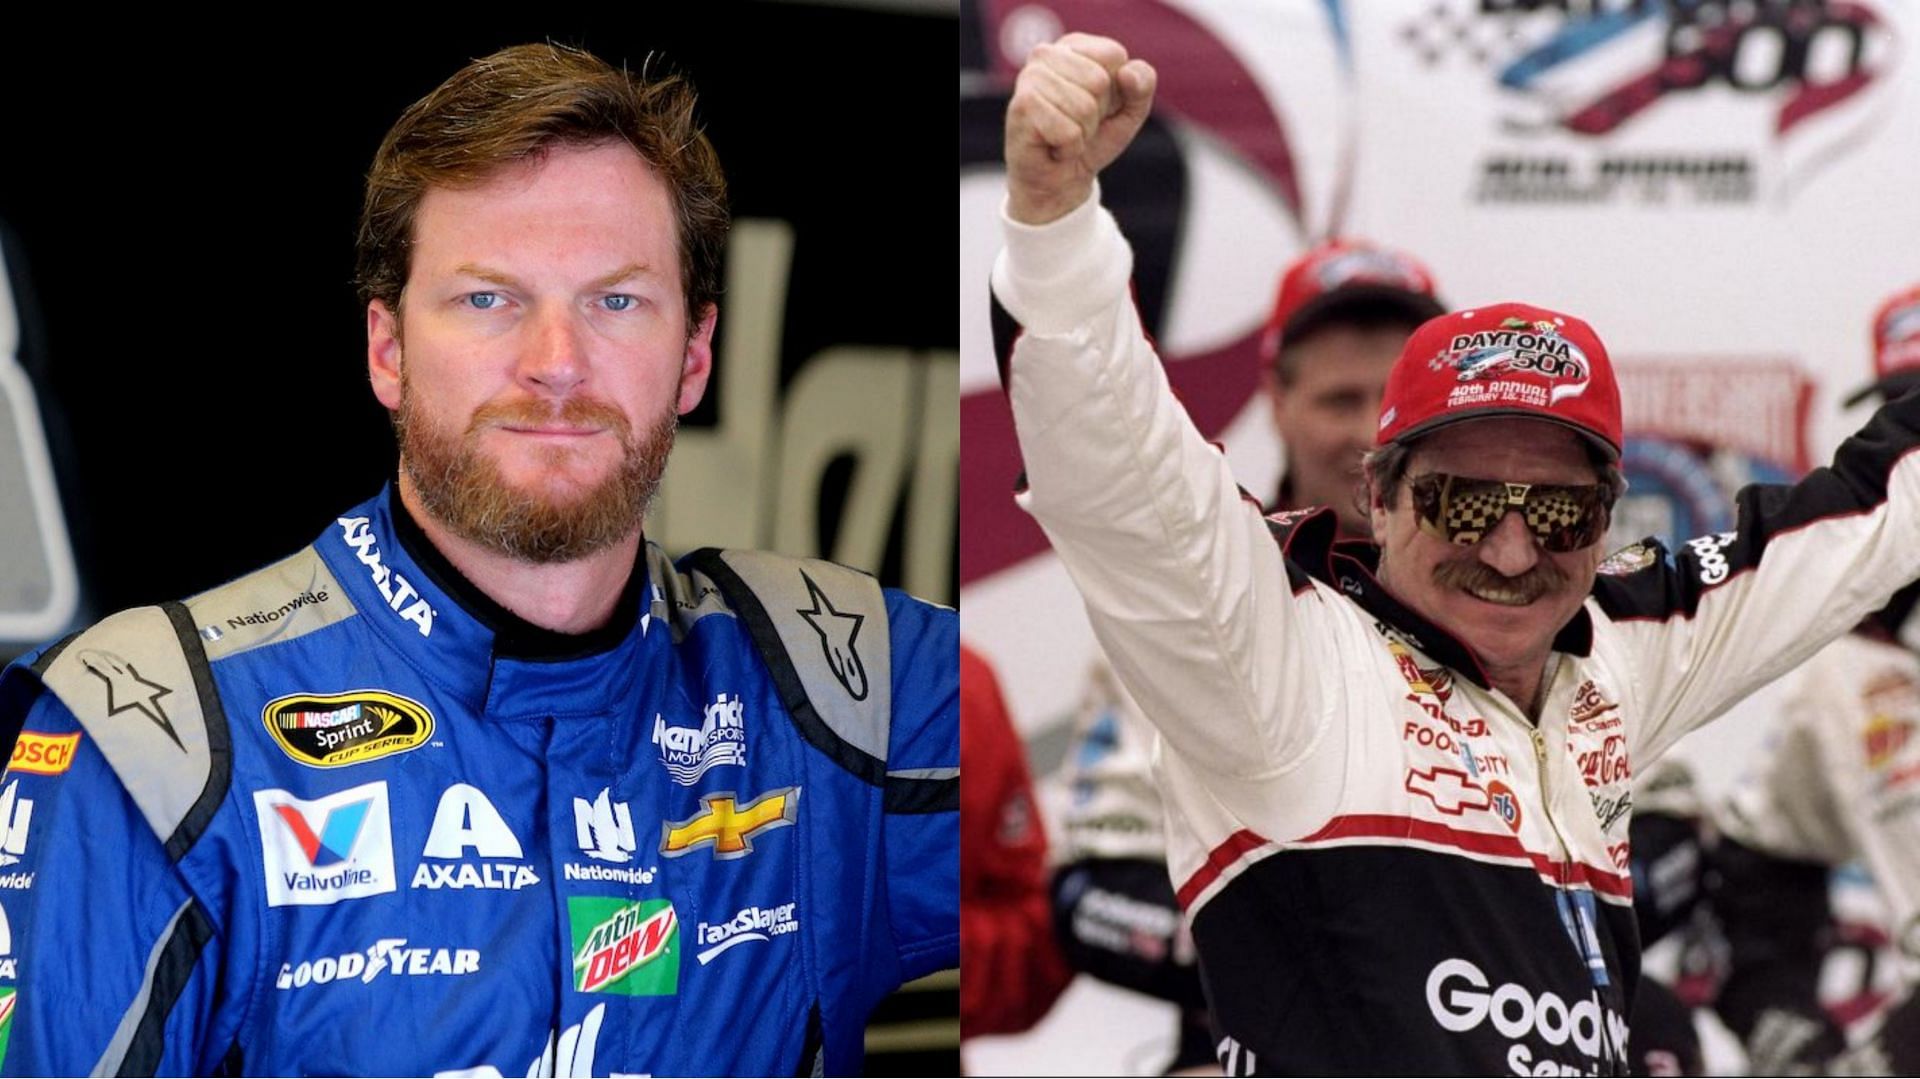 Dale Earnhardt Jr. on his father